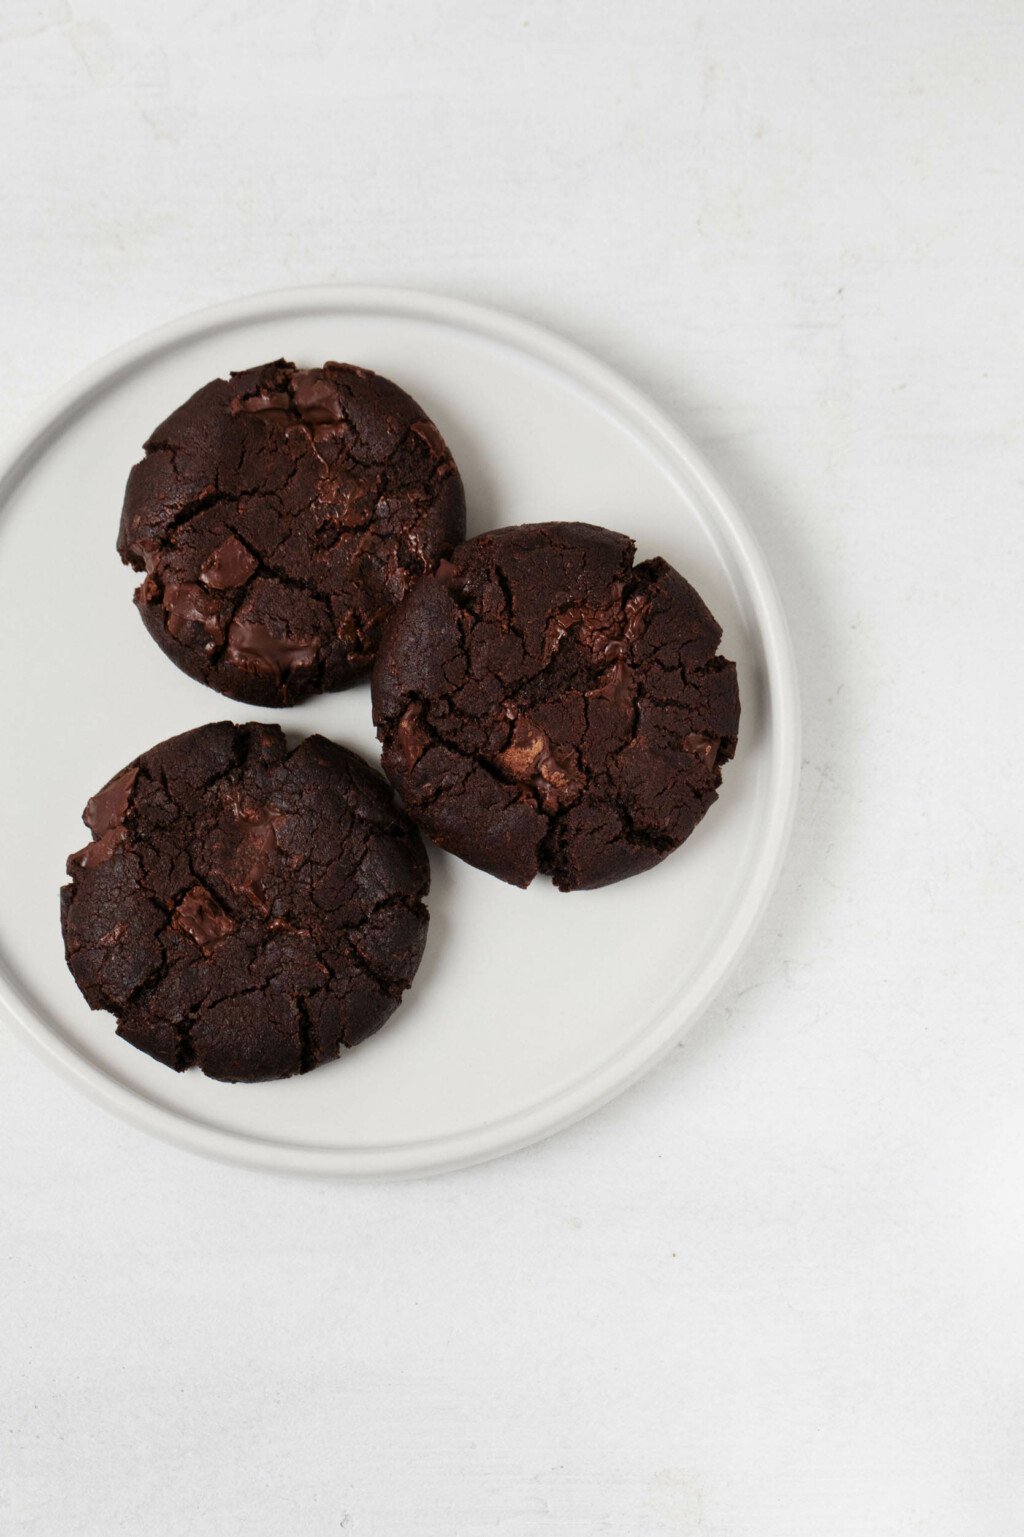 Three round, chewy double chocolate chip cookies are resting on a white ceramic plate. The plate is placed on a white surface.